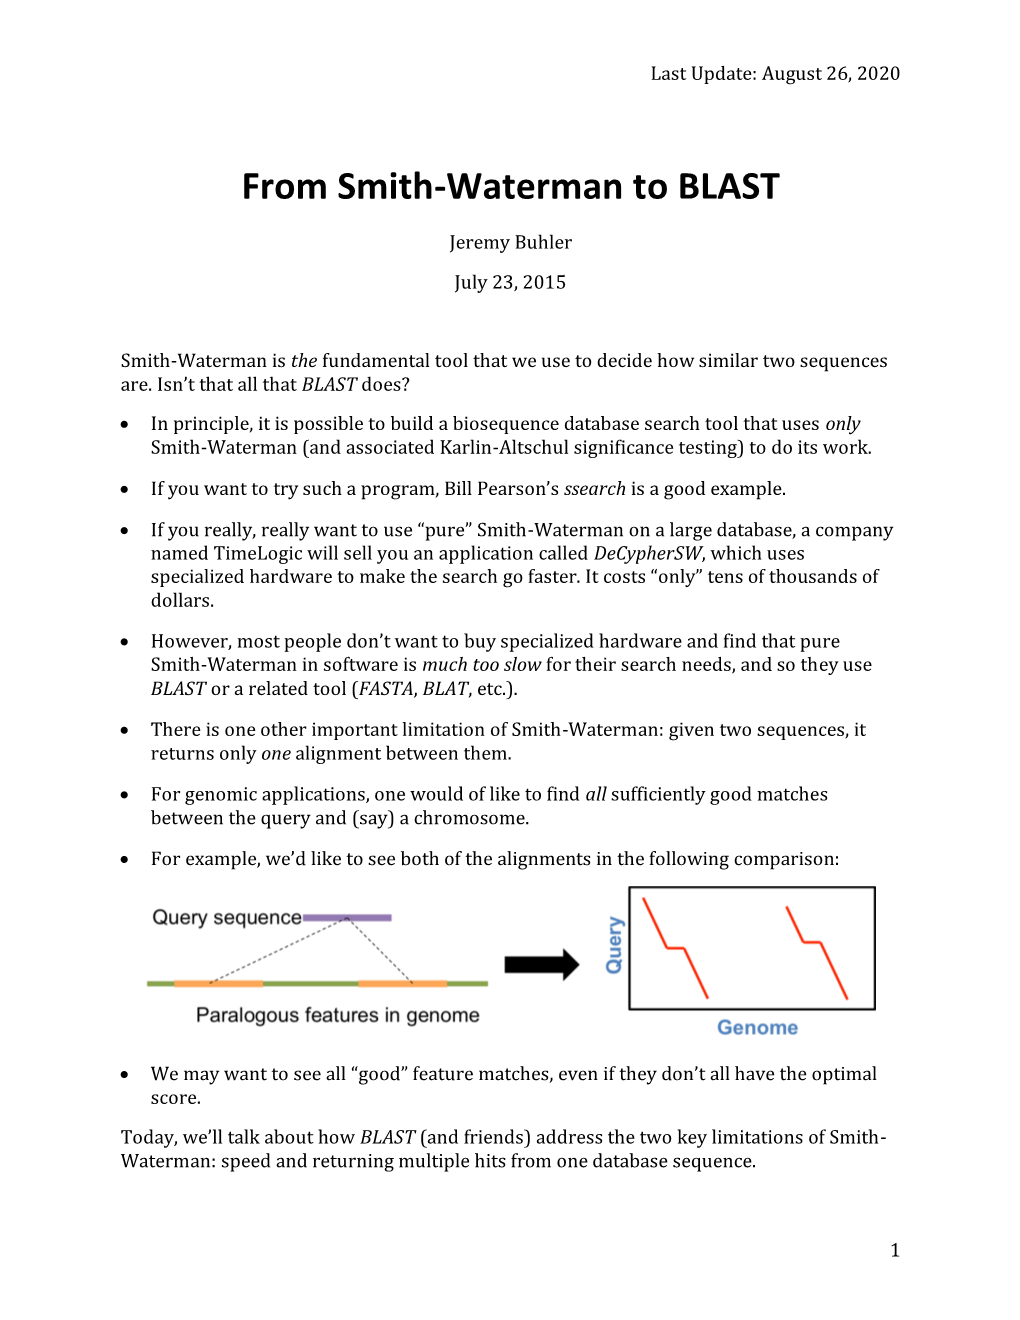 From Smith-Waterman to BLAST